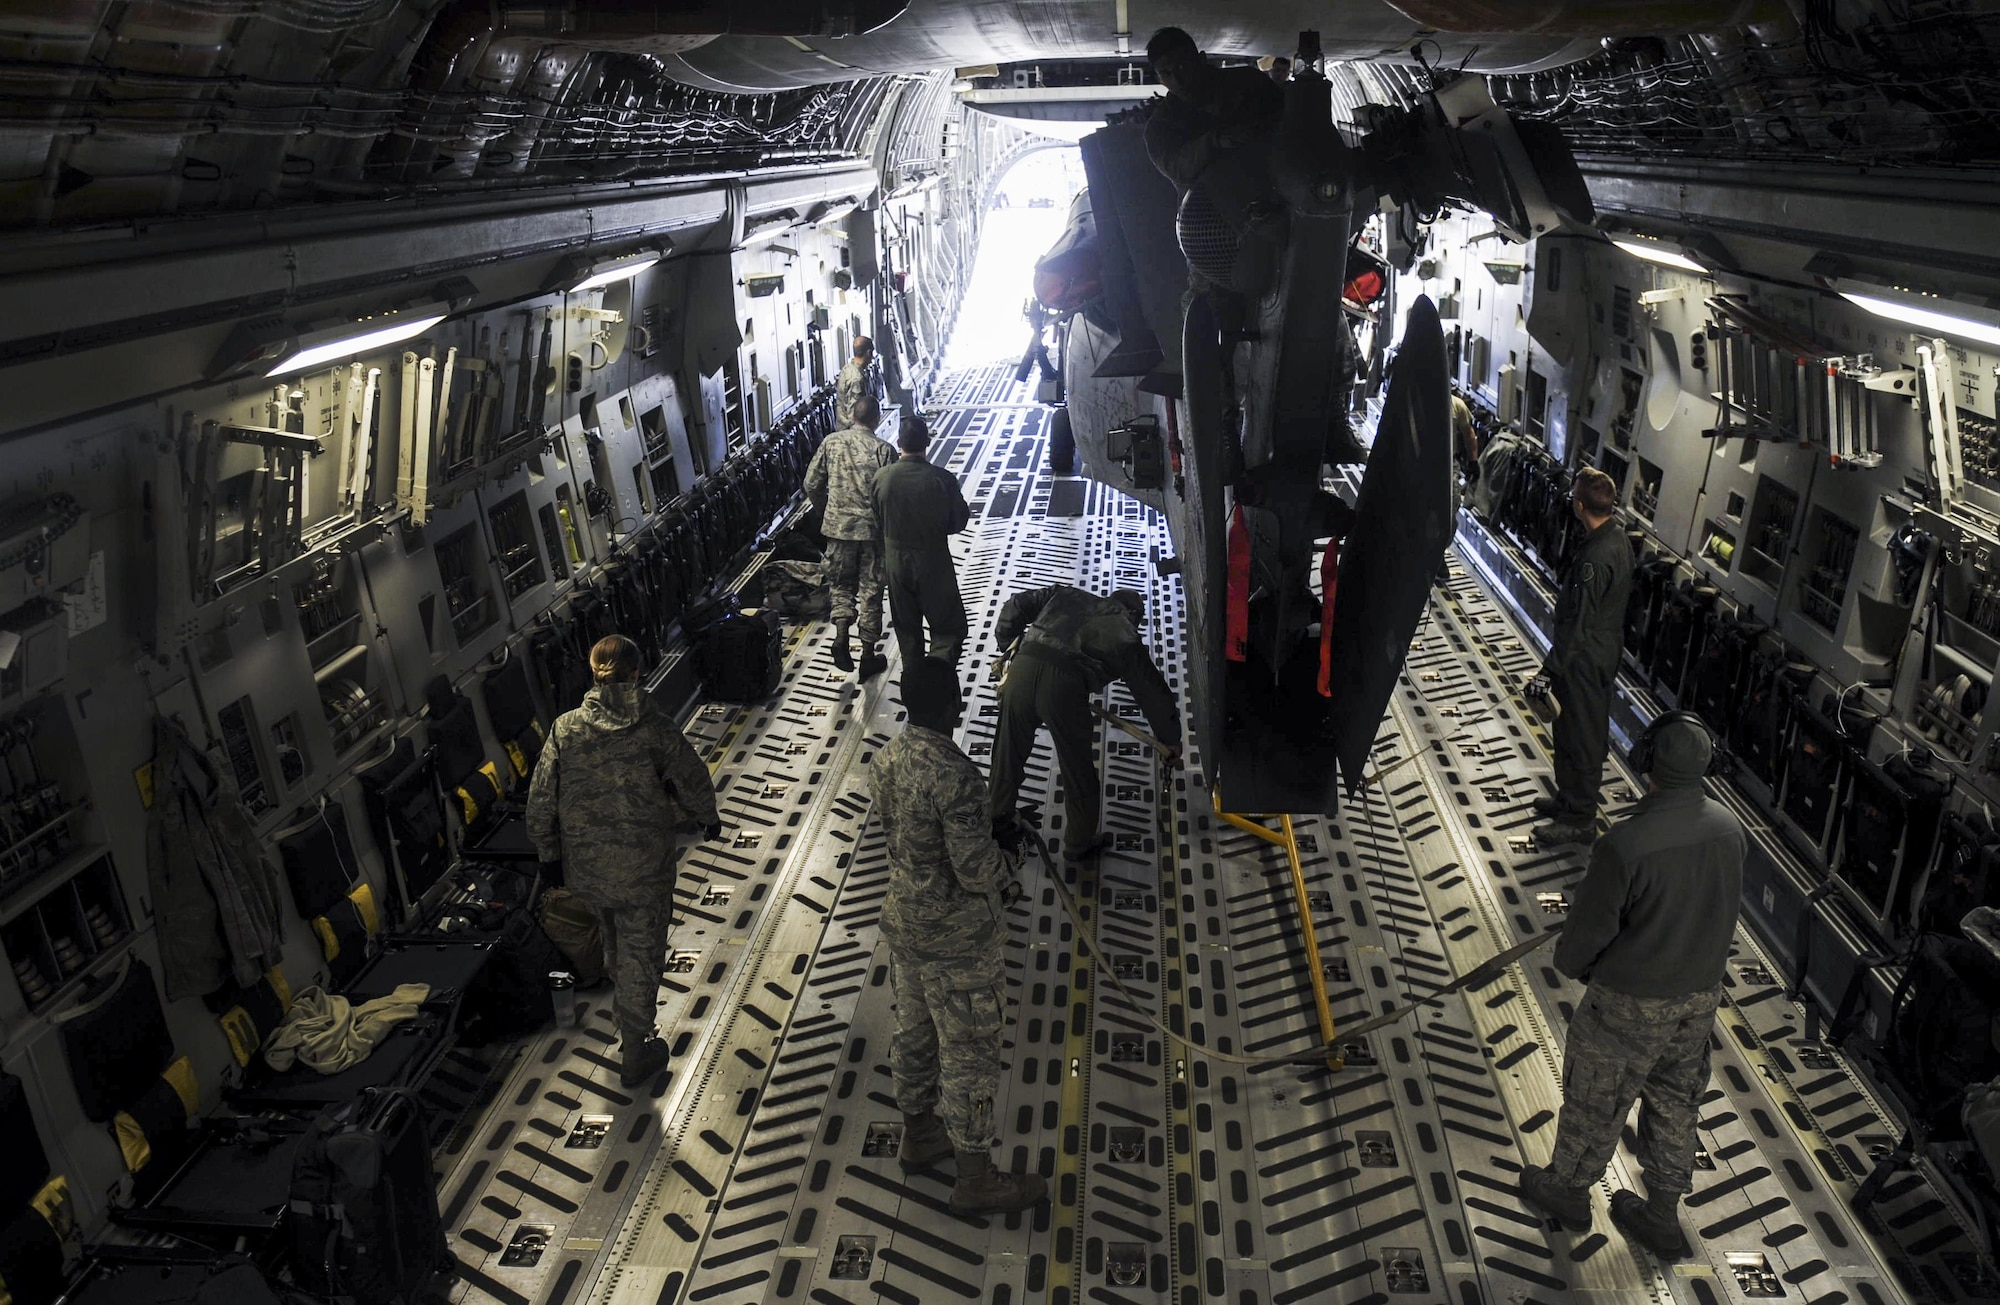 Airman from the 34th Weapons Squadron, secure a HH-60 Pave Hawk in the cargo area of a C-17 Globemaster III assigned to the 57th Weapons Squadron, McChord Air Force Base, Wash., March 28, 2017. The C-17 is capable of rapid strategic delivery of troops and all types of cargo to main operating bases or directly to forward bases in the deployment area. (U.S. Air Force photo by Airman 1st Class Kevin Tanenbaum/Released) 